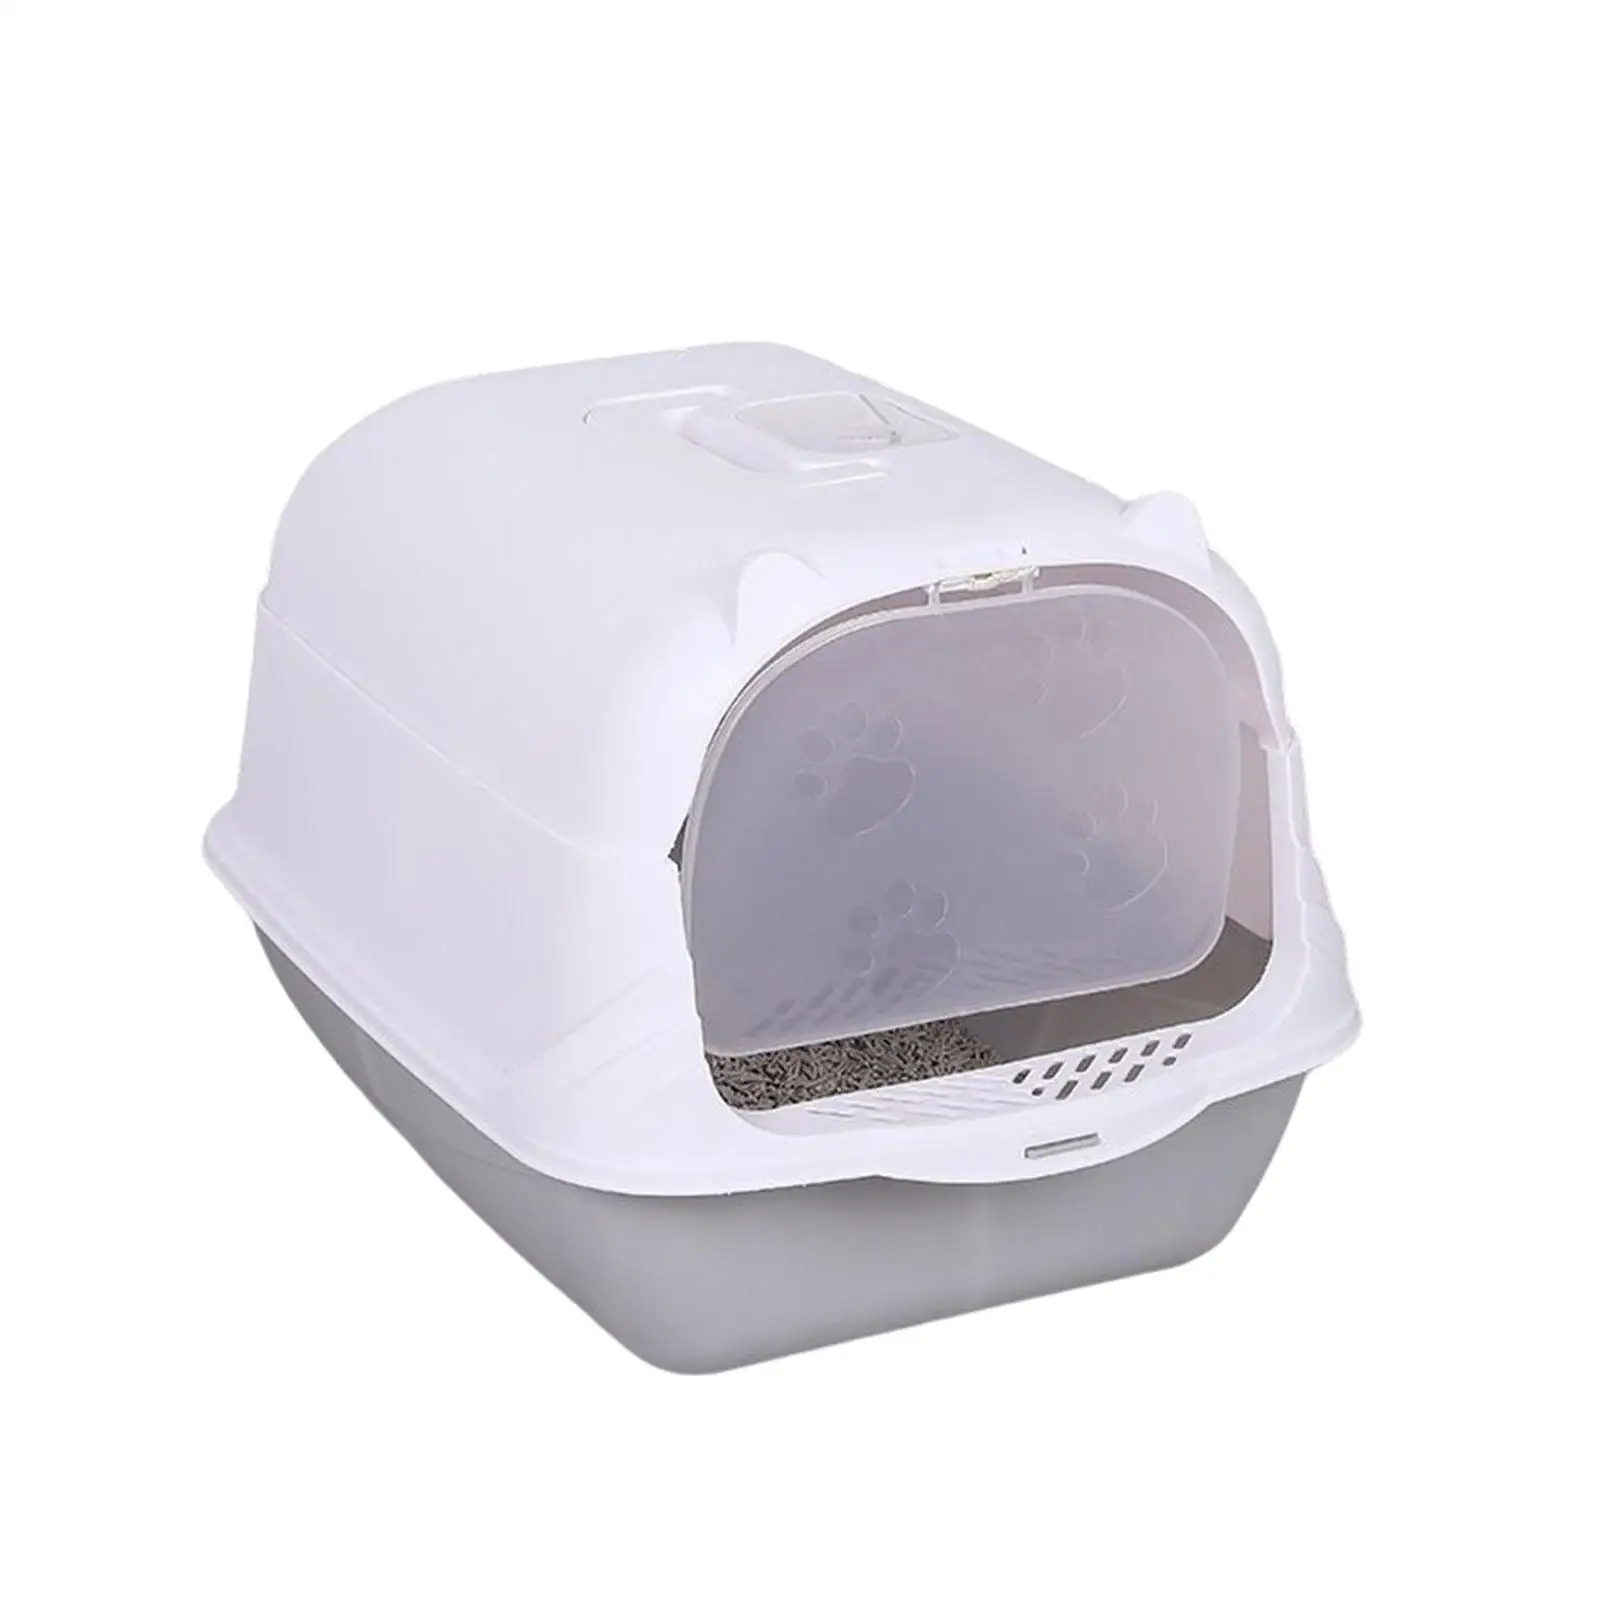 Pet Litter Tray Enclosed Potty Toilet Litter Pan Extra Large